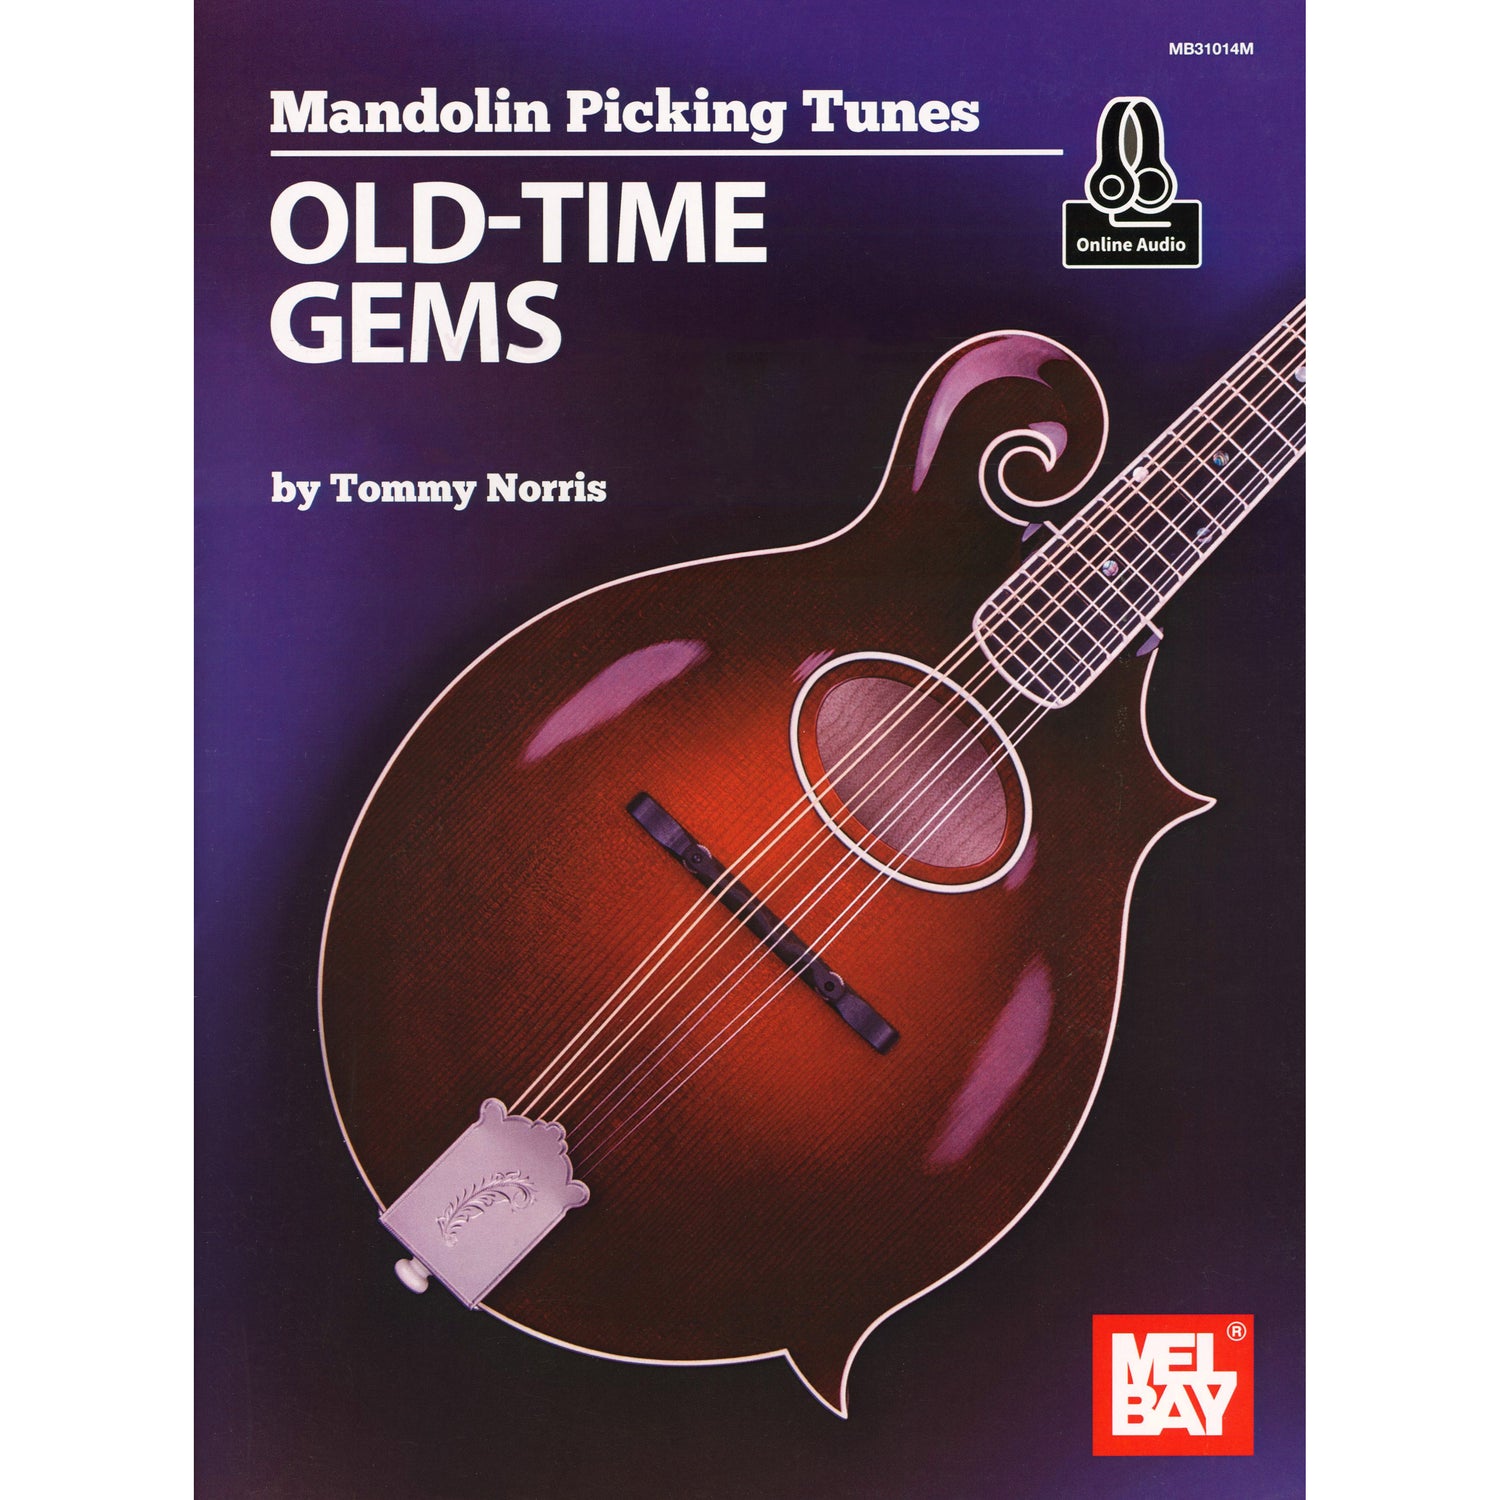 Image 1 of Mandolin Picking Tunes: Old-Time Gems by Tommy Norris - SKU# 02-31014M : Product Type Media : Elderly Instruments